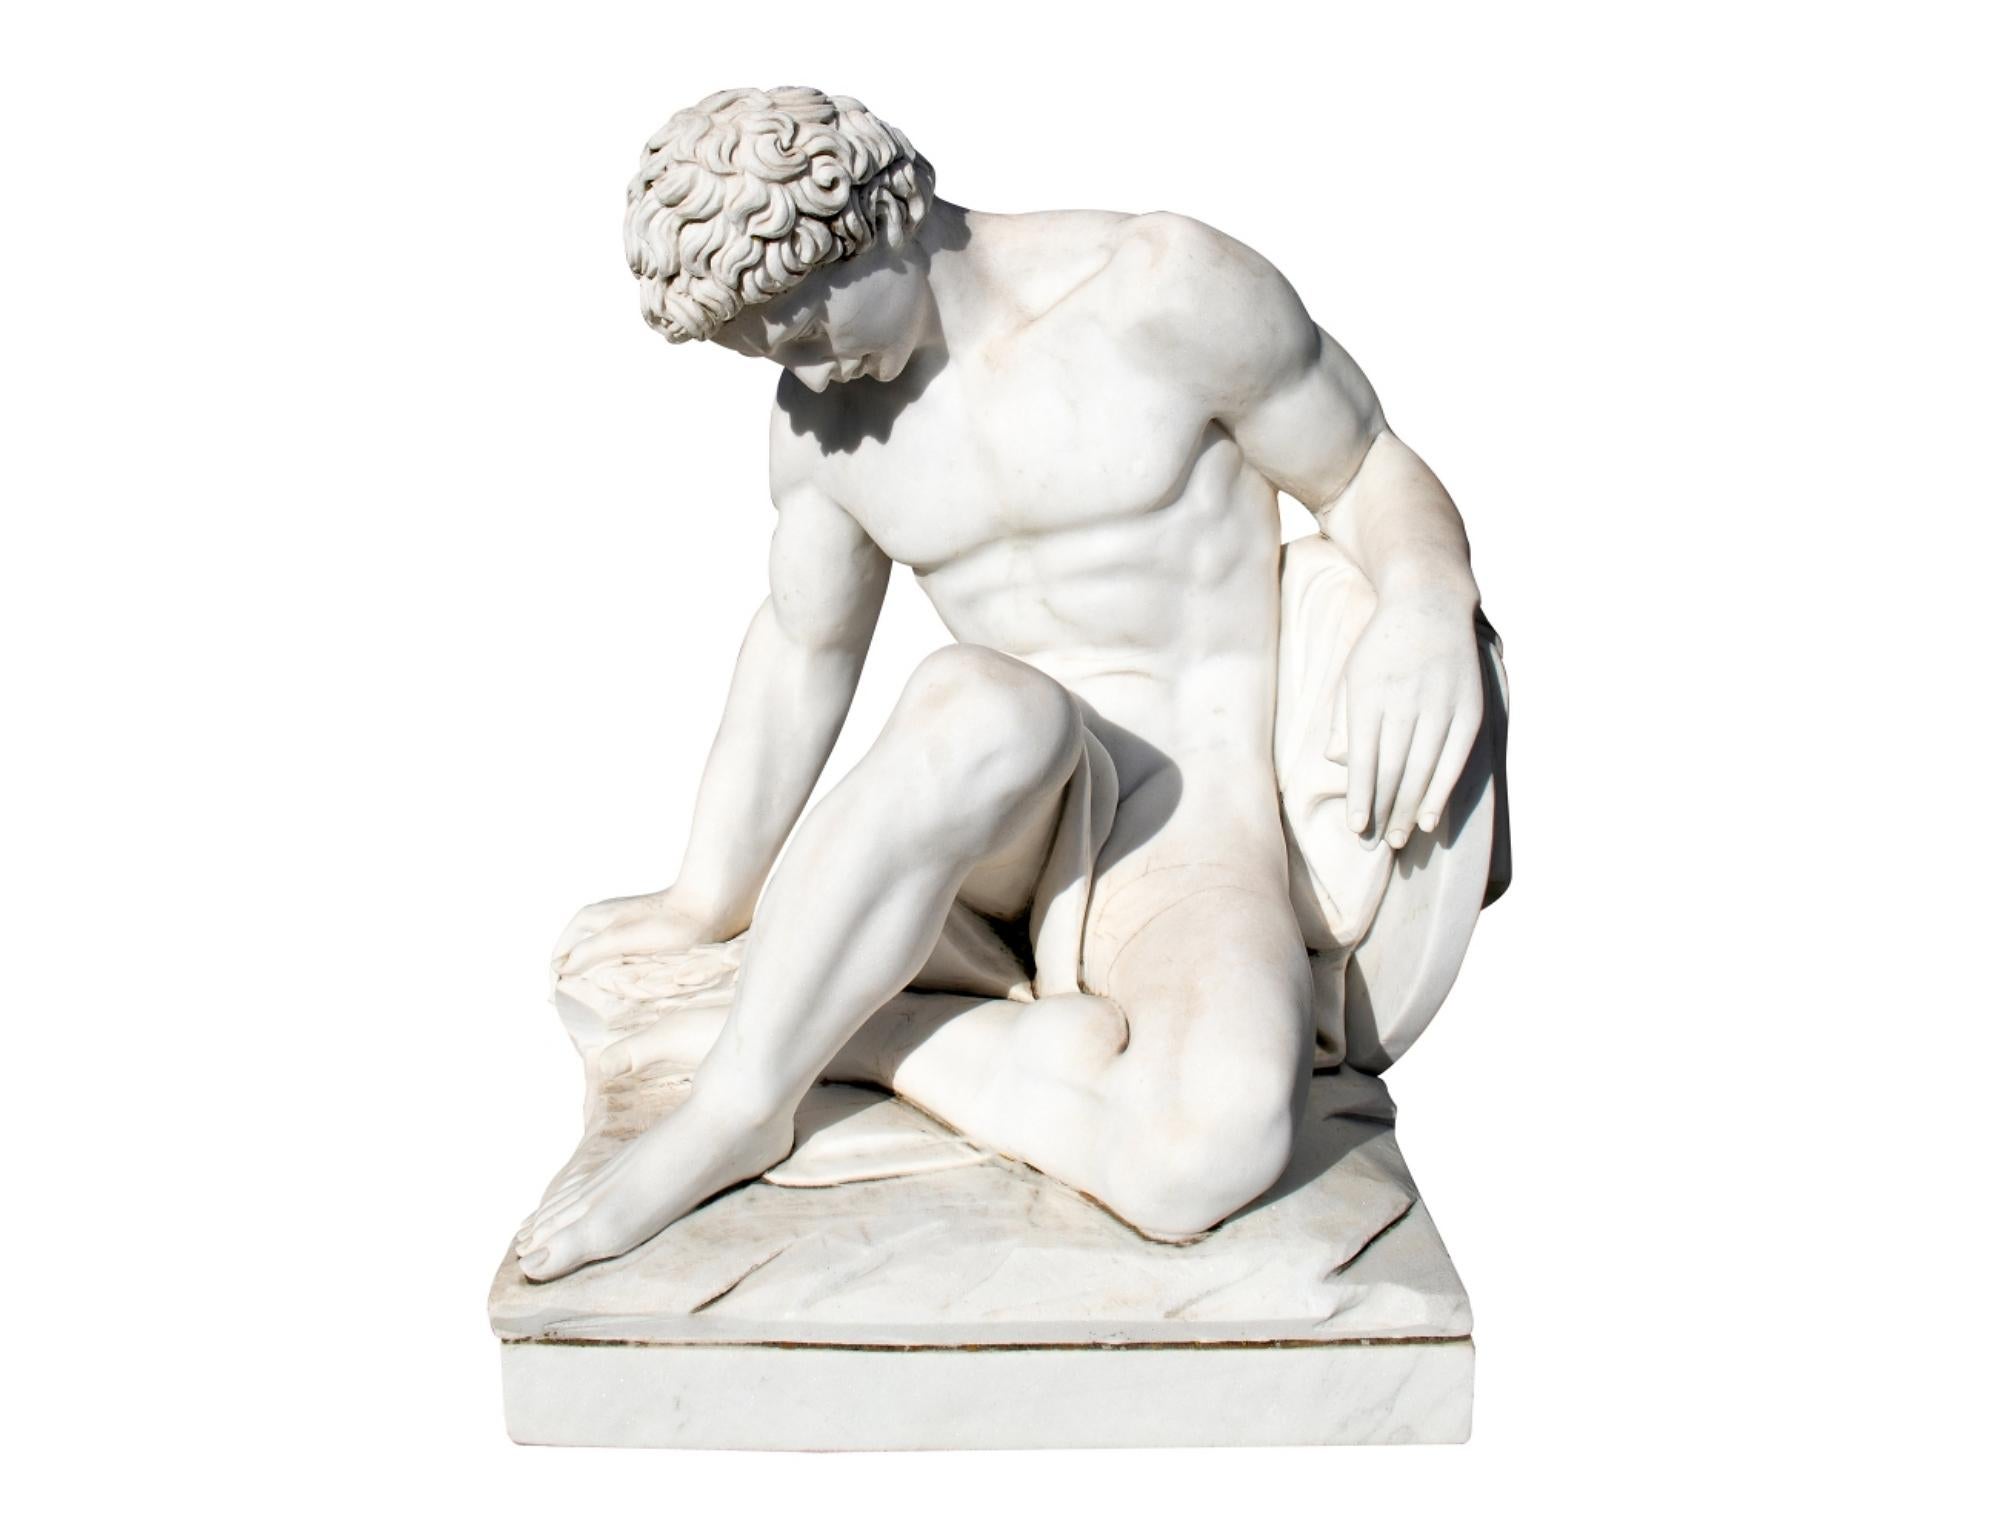 Hand-Crafted Roman Sculpture in Carrara White Marble, 20th Century